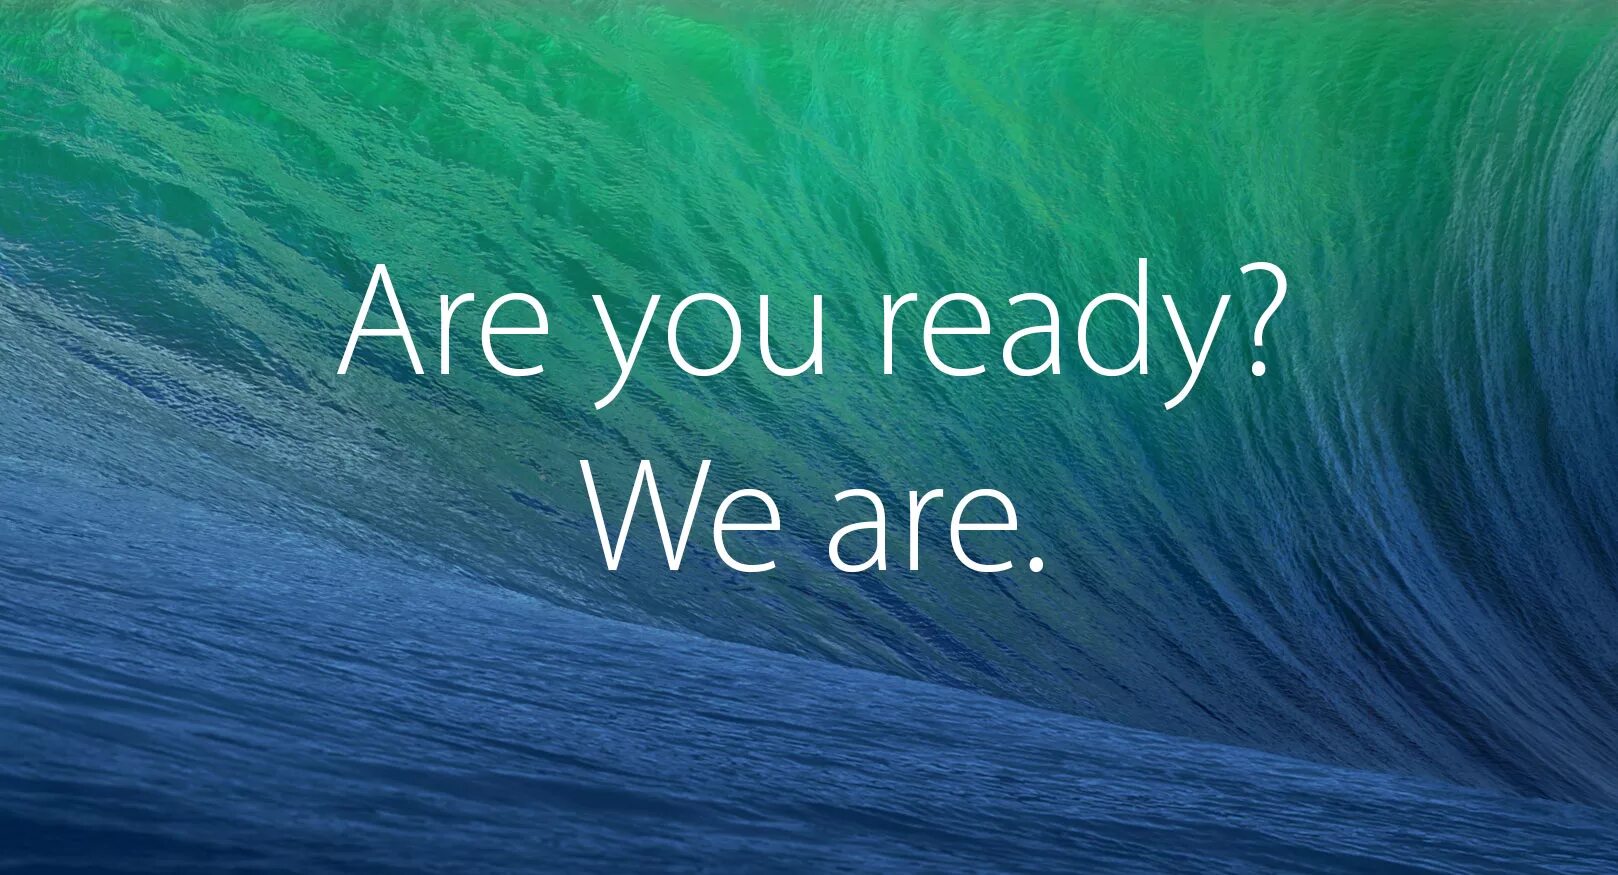 Are you ready to order ordering. Are you ready. Os x Mavericks обои. Are you ready картинка. Are you ready ? Фото.